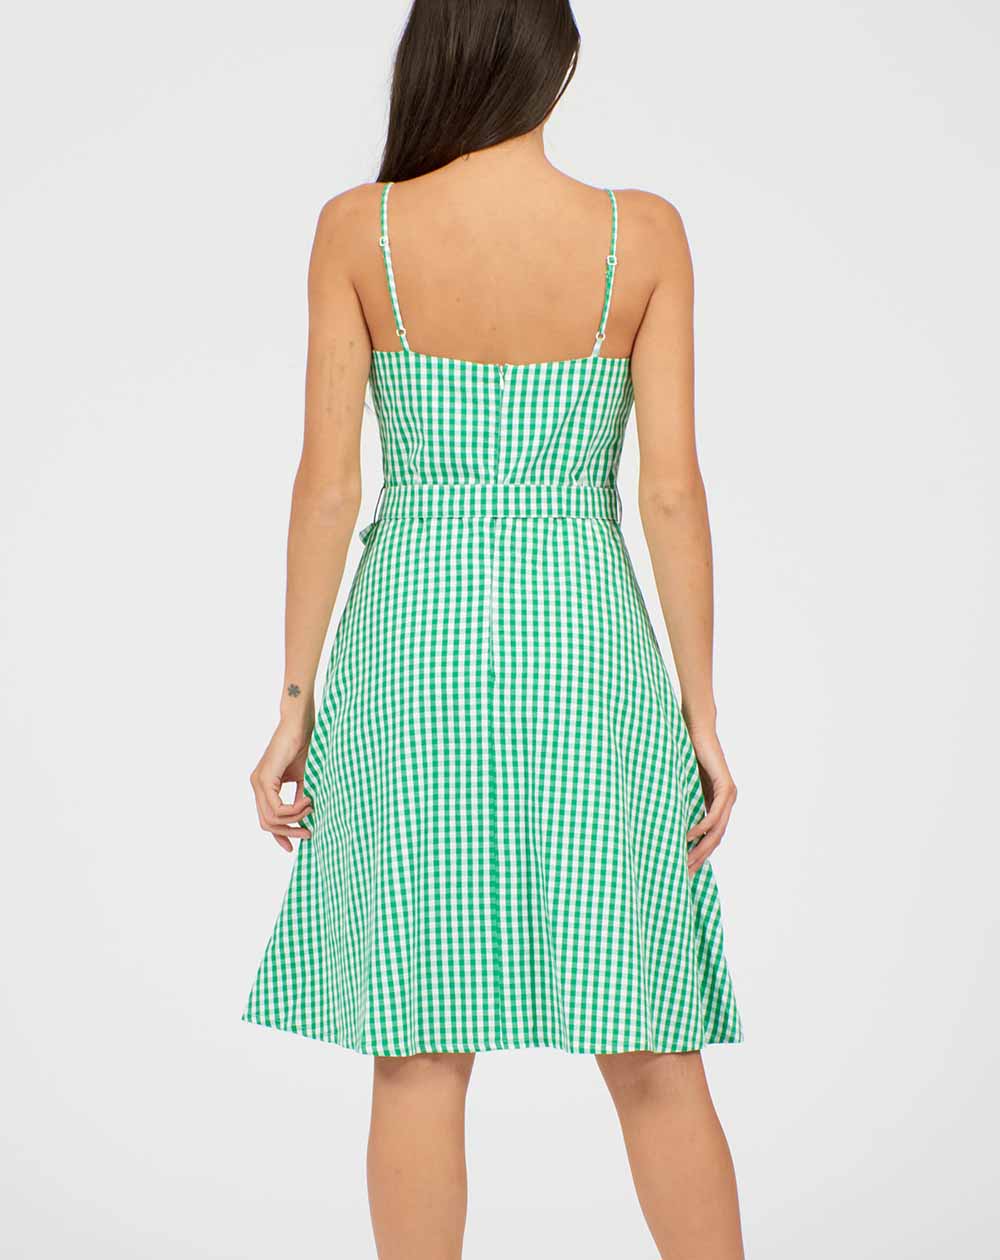 Pretty Vacant Tilly Dress in Green Gingham Print